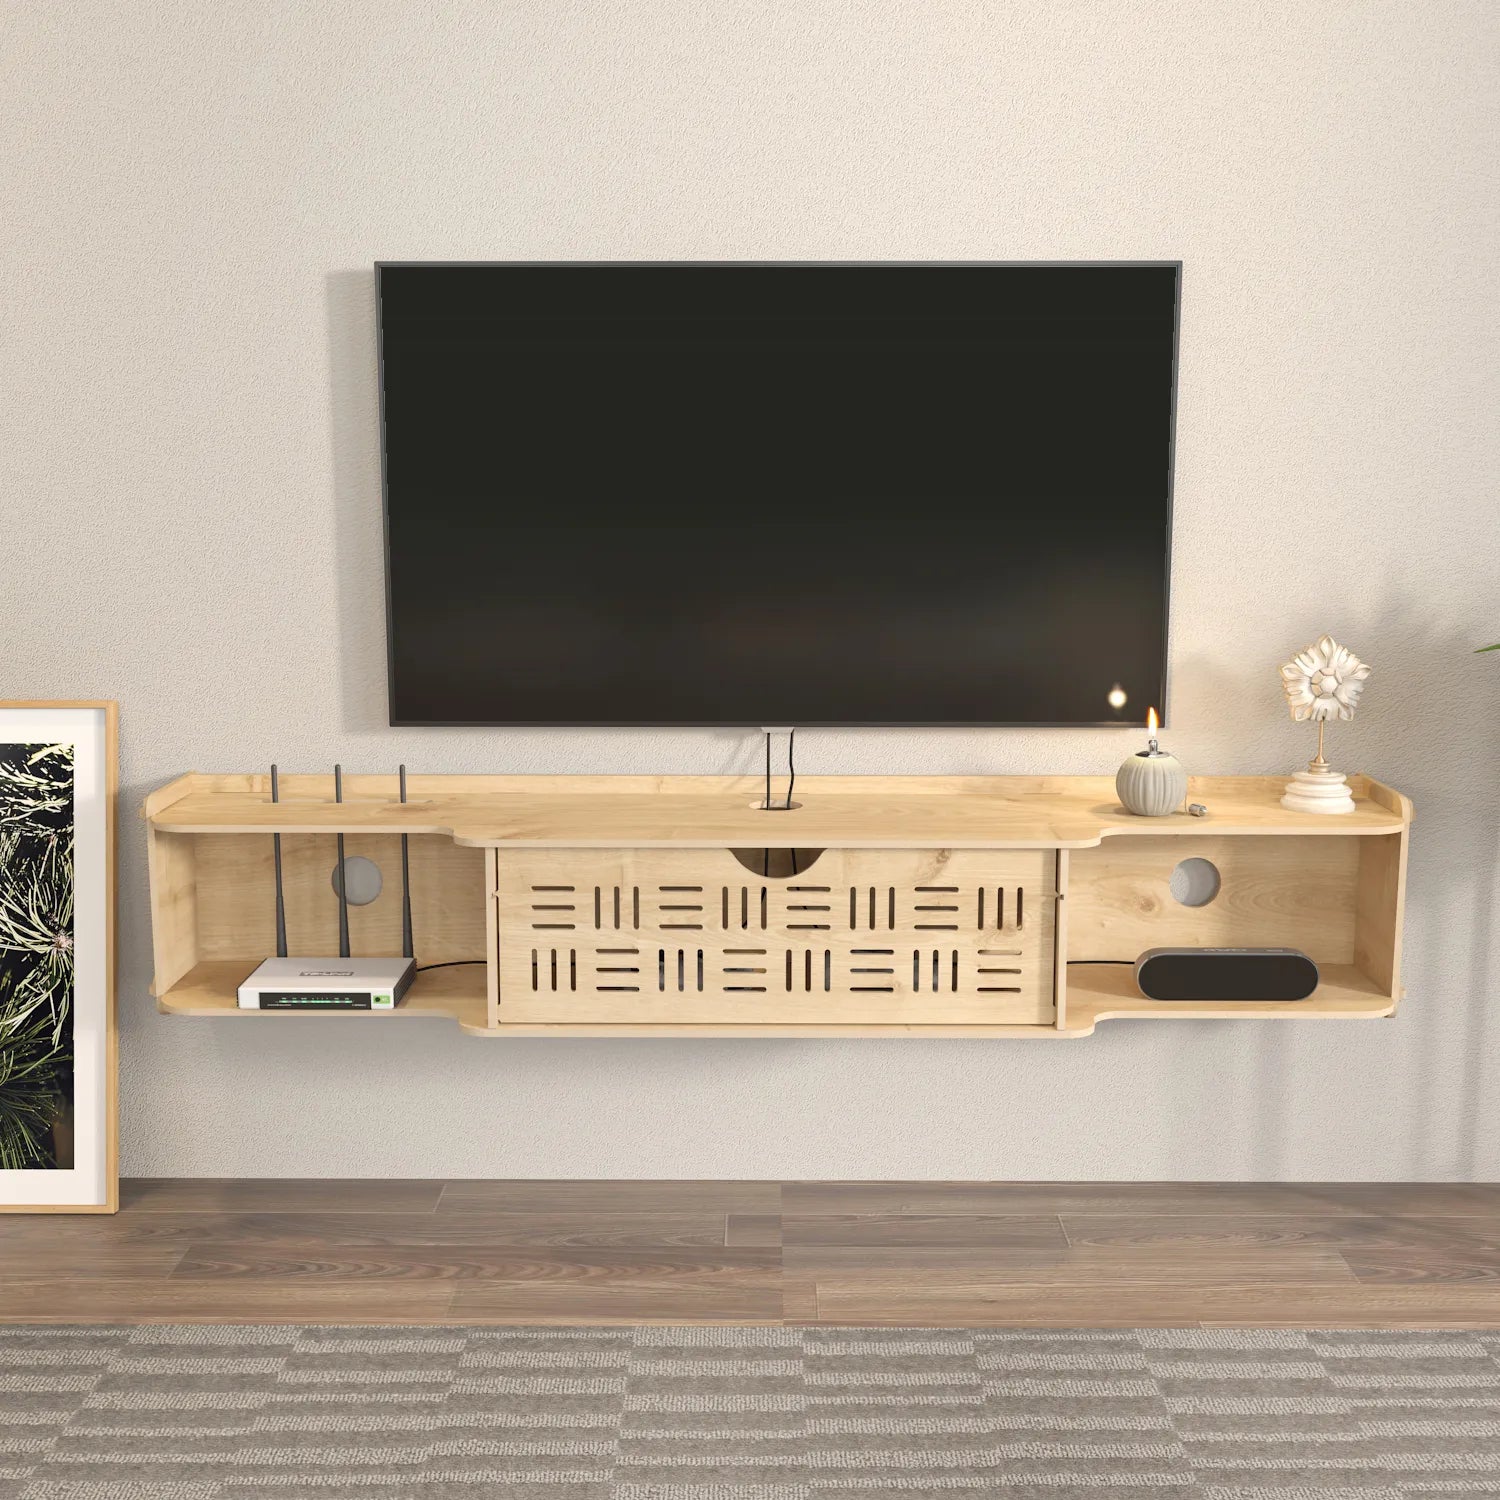 Pare 54" Wide Floating TV Stand and Media Console | MDF | Screwless Design